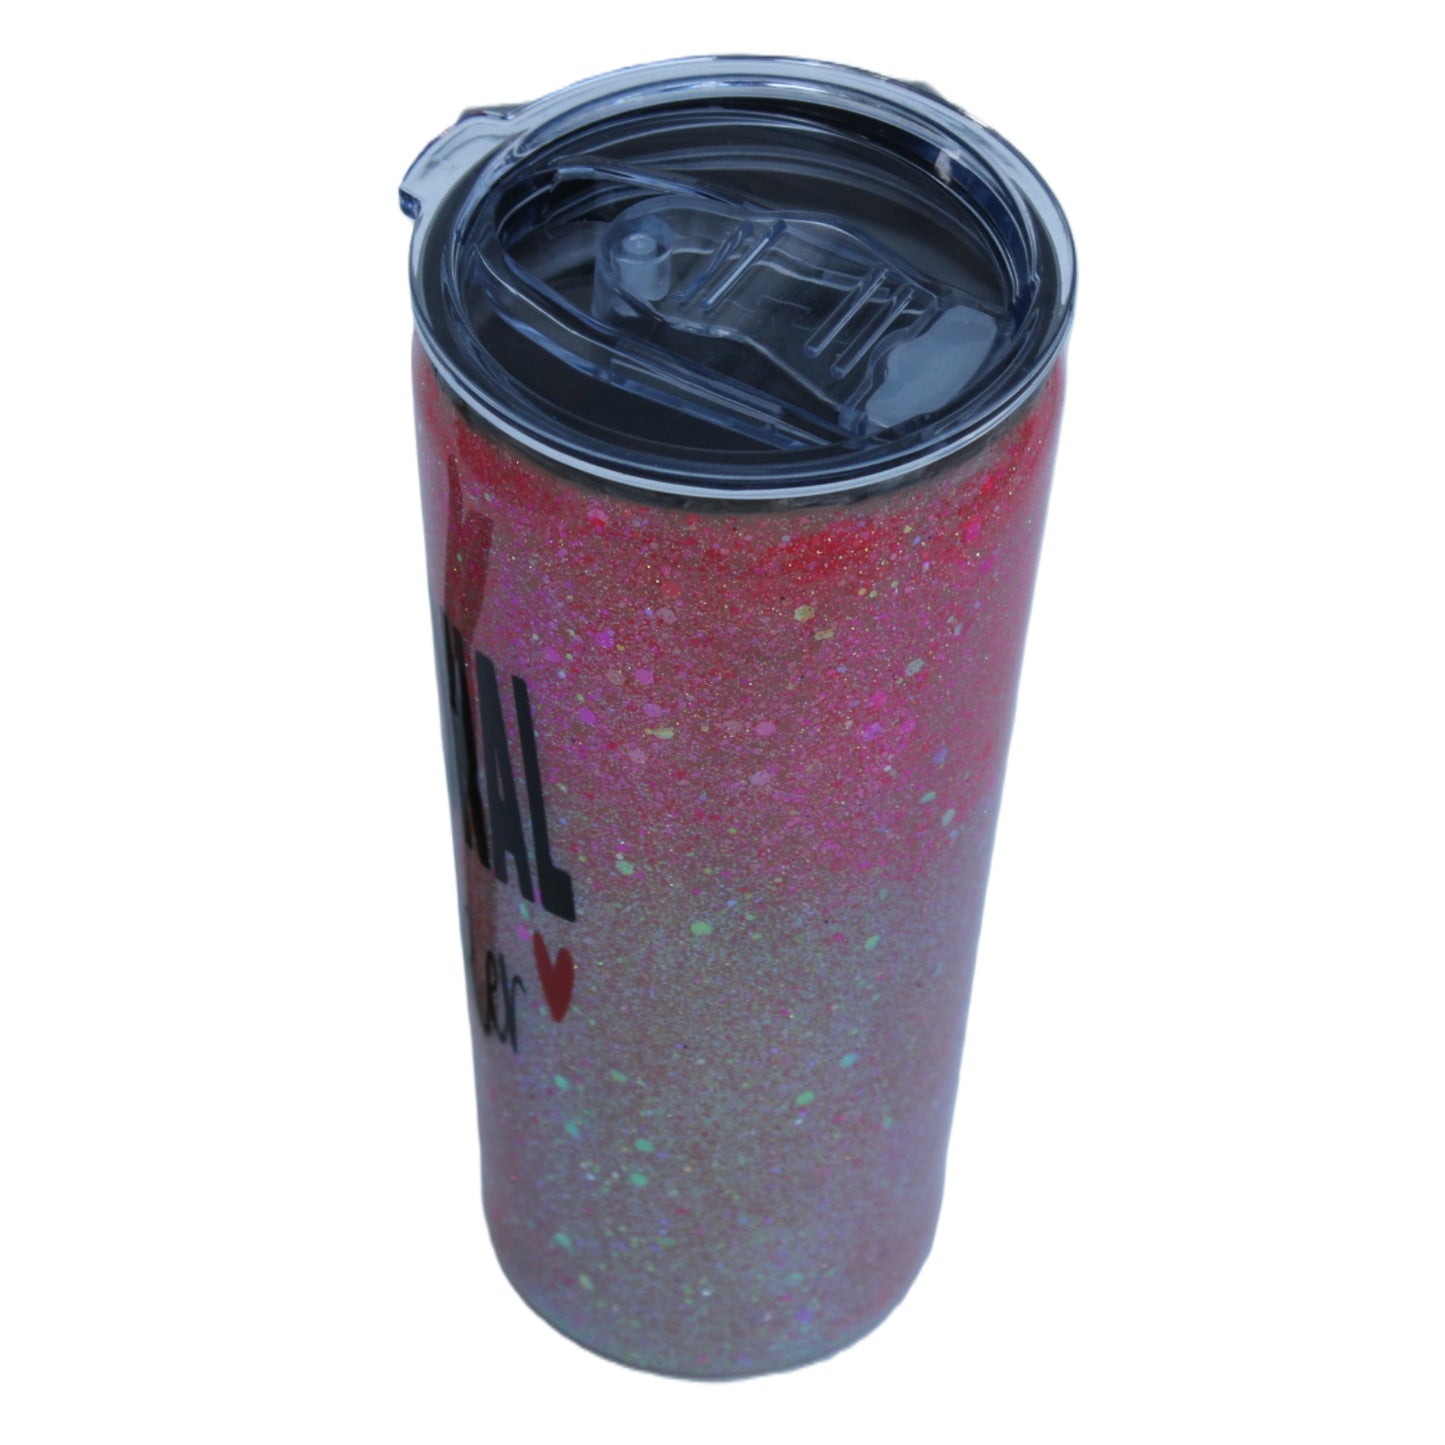 Tumbler Tapered Smooth 20 ounce with "Professional Over Thinker" written on the side